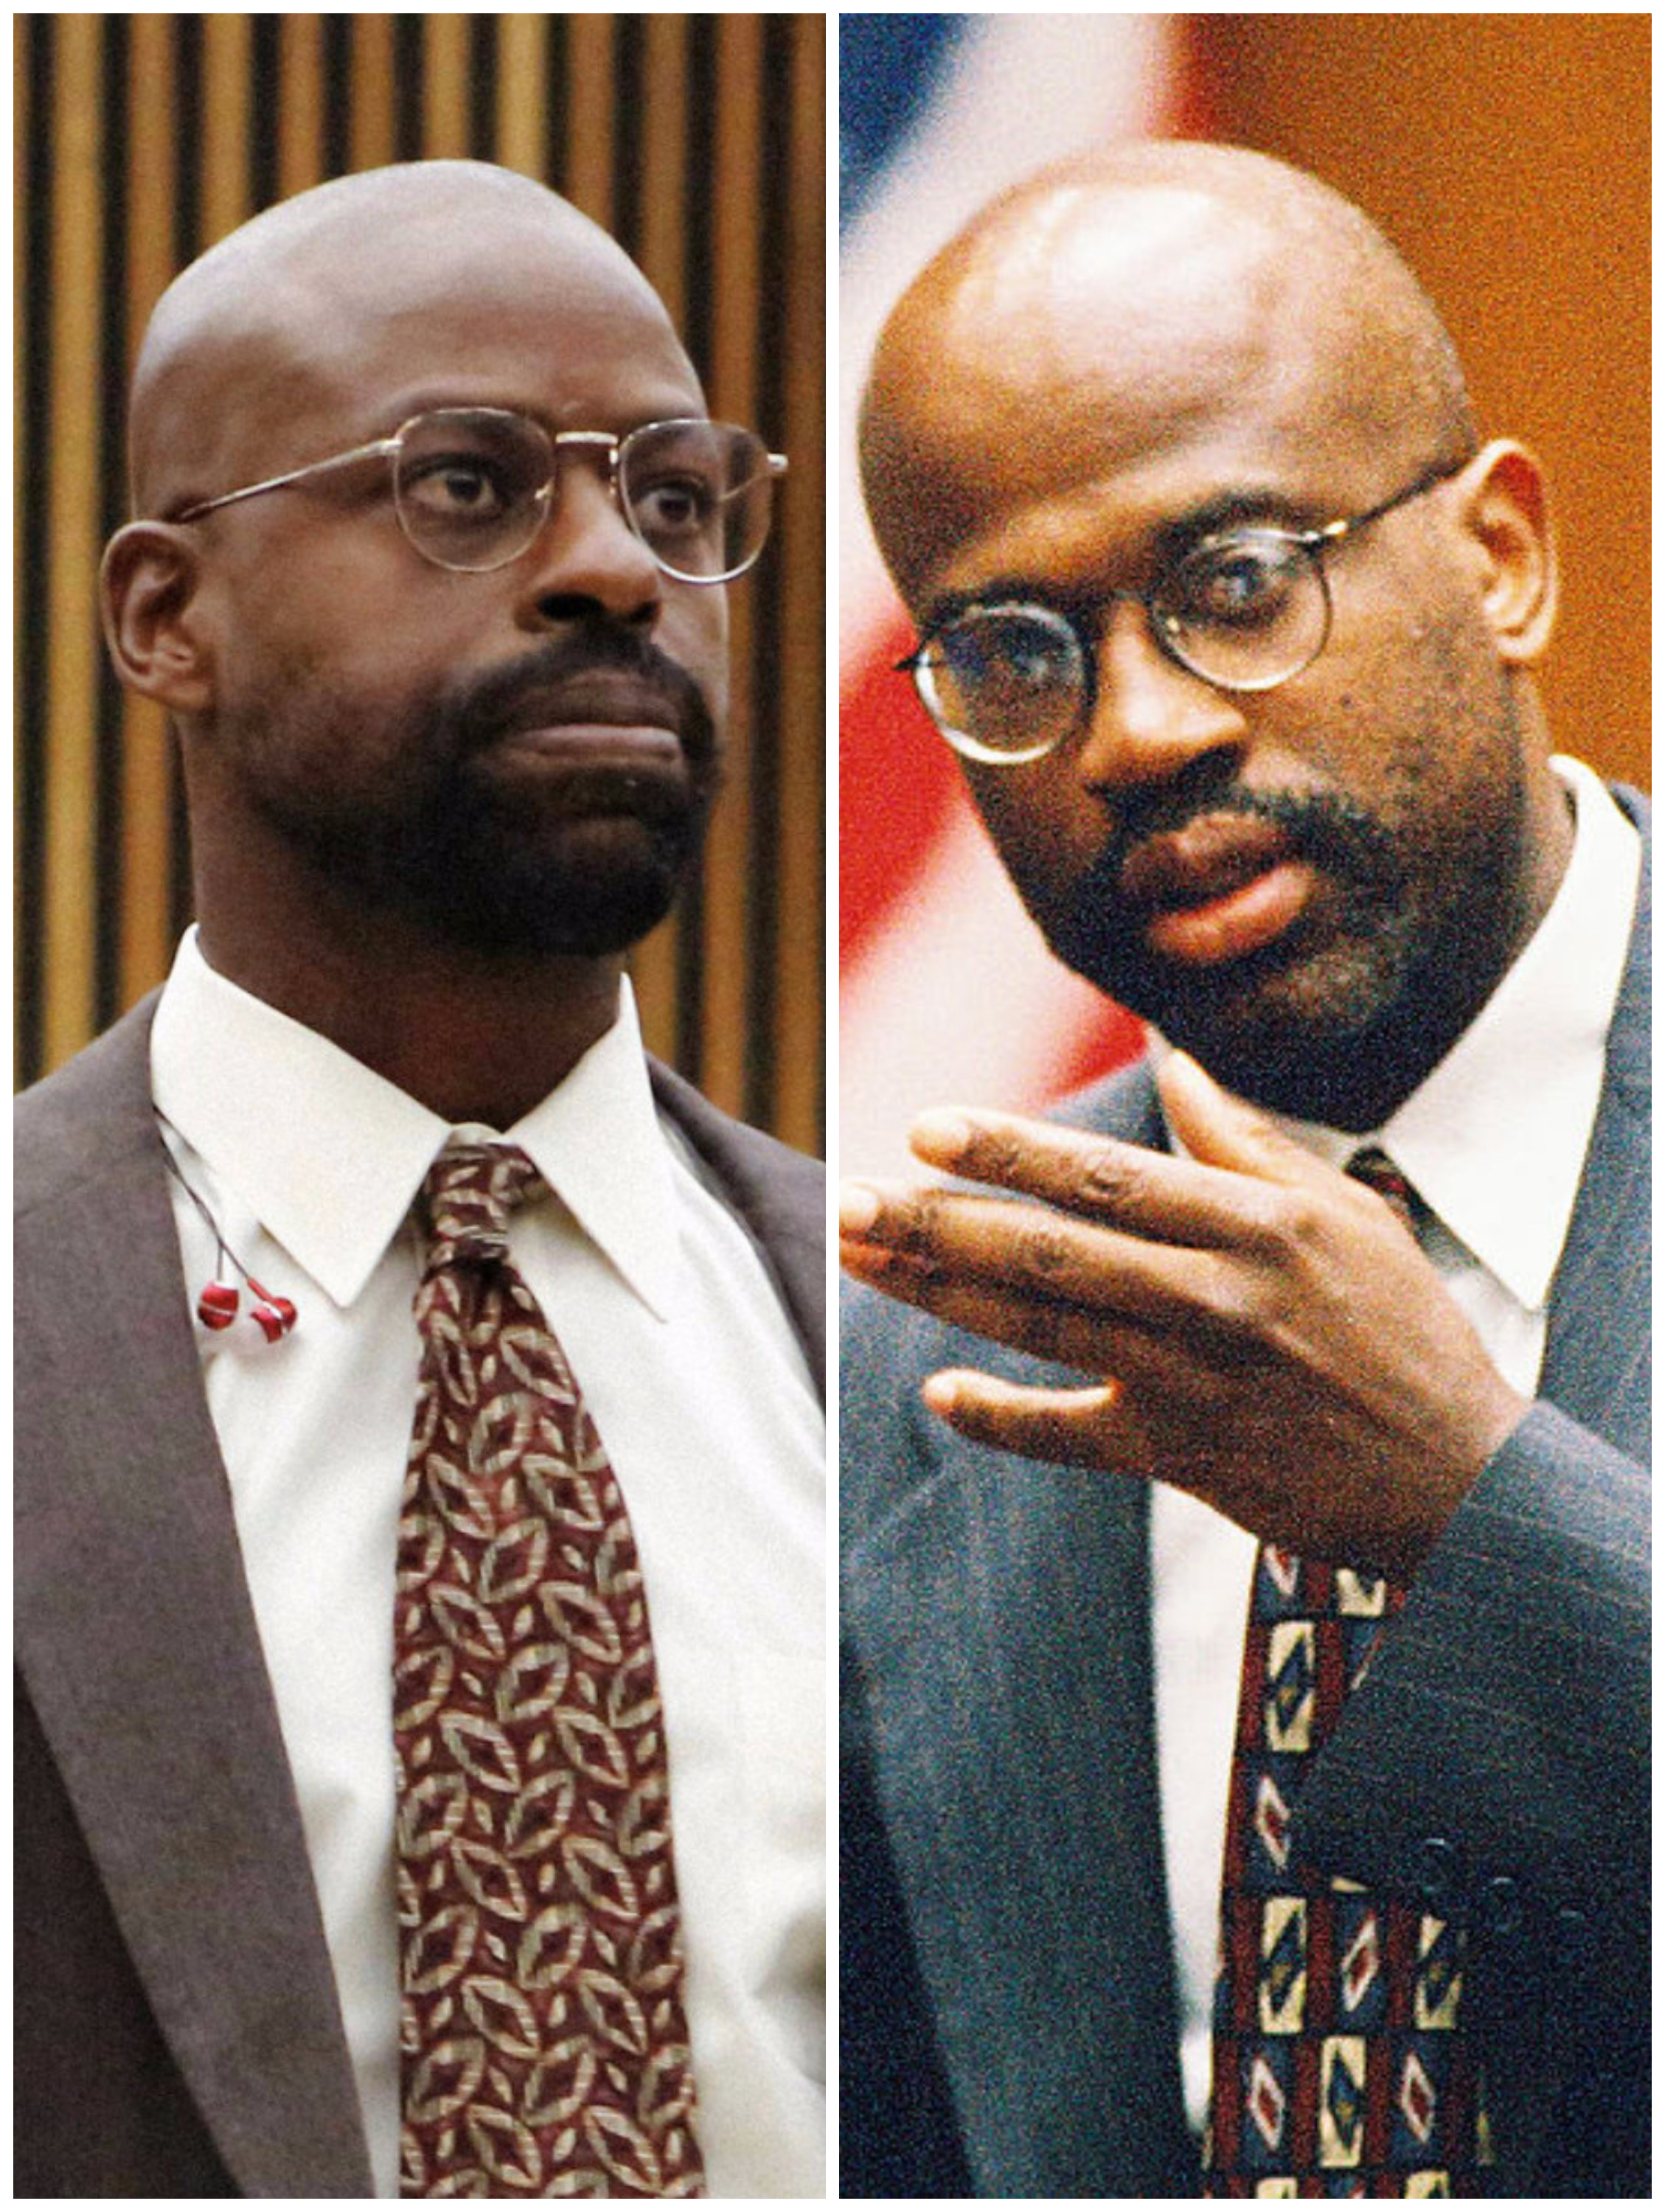 Sterling K. Brown in &quot;The People v. O. J. Simpson: American Crime Story&quot; vs. the real Christopher Darden